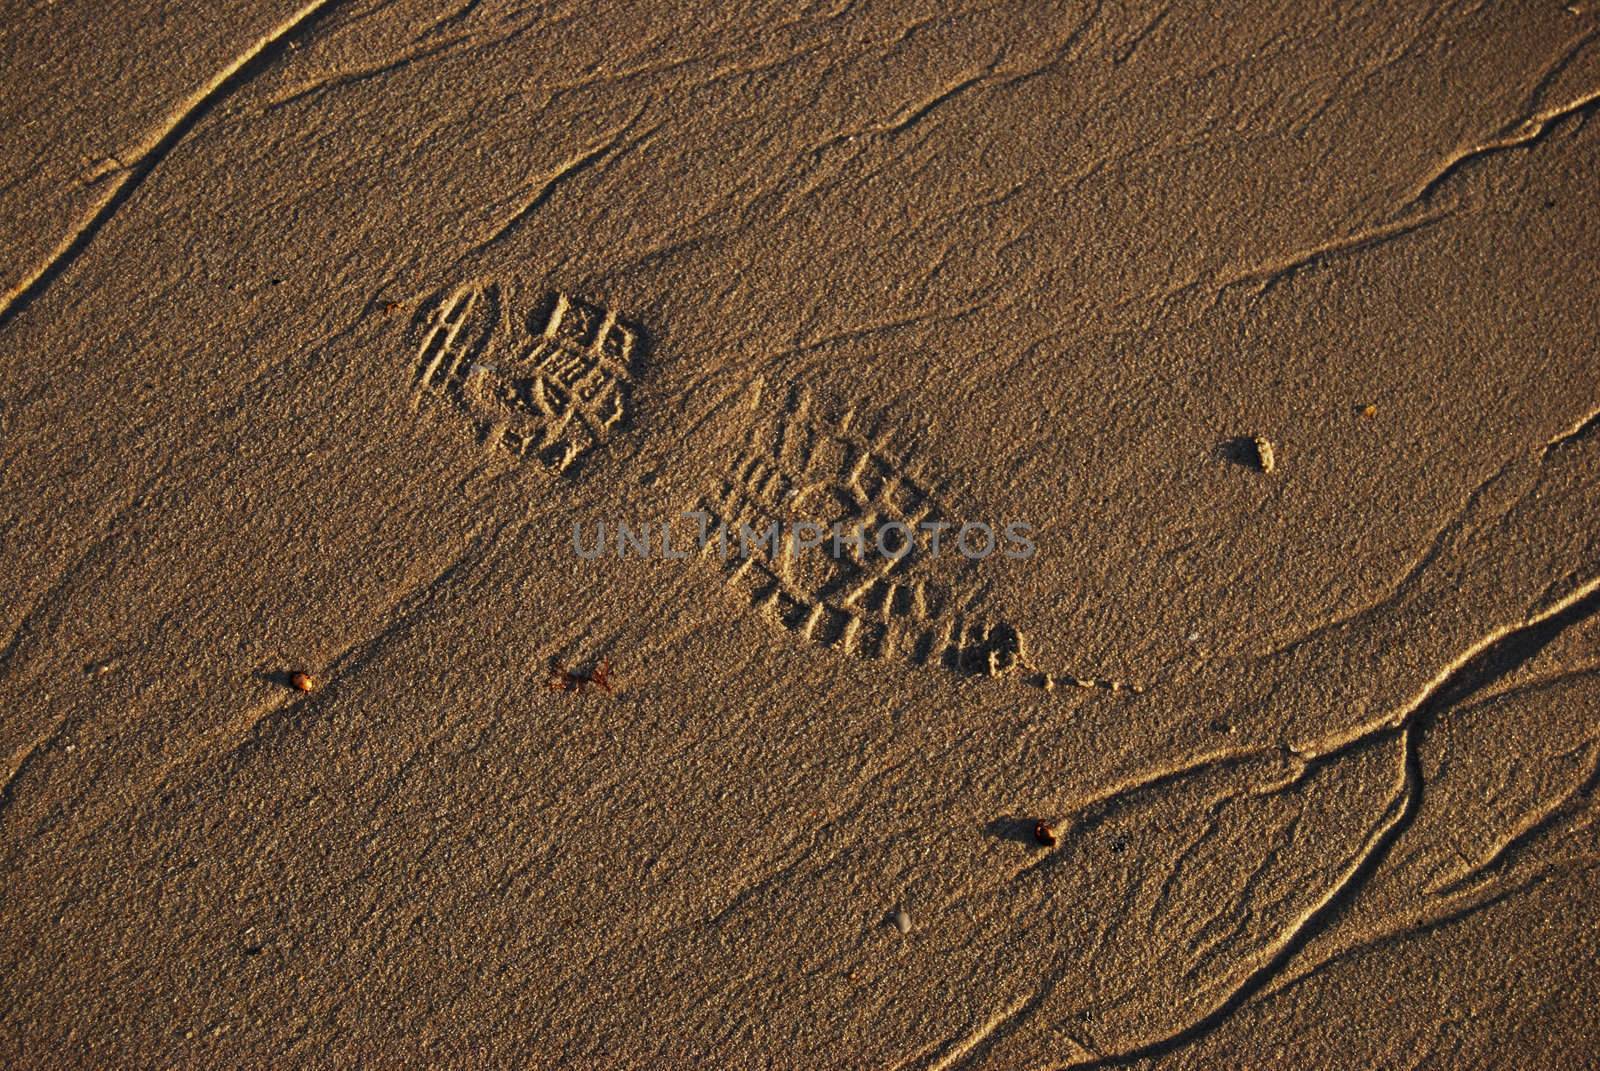 tracks of footprints in the wet sand of a beach